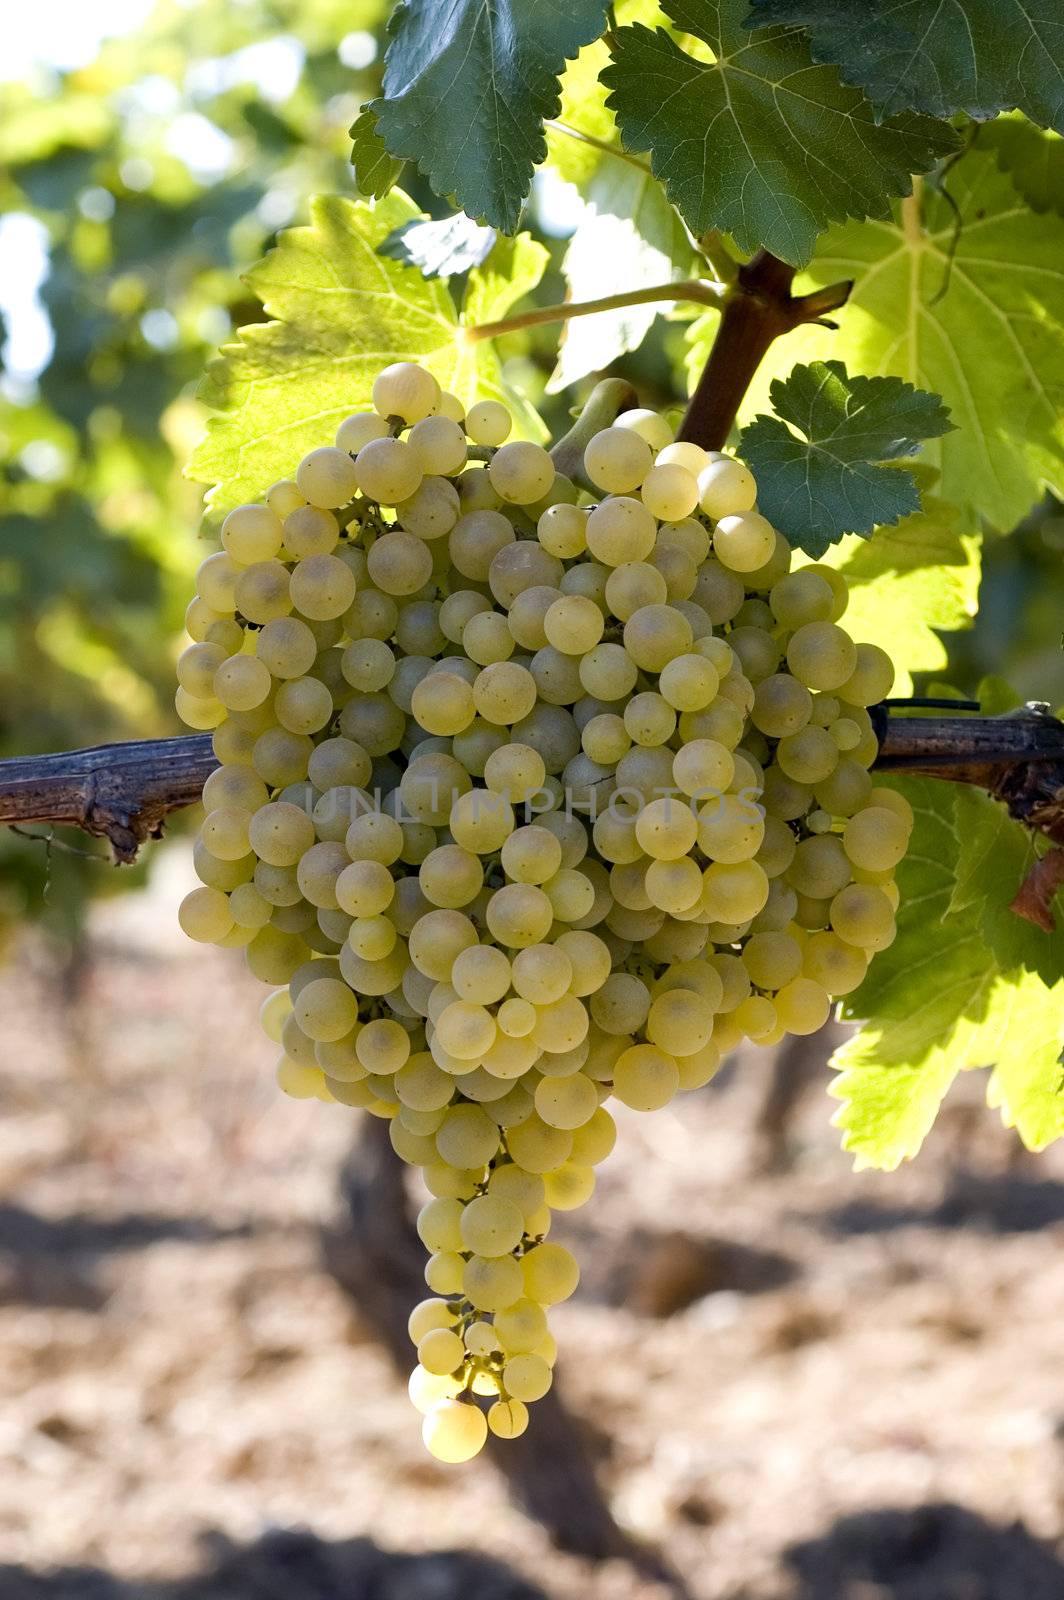 A view of a large bunch of plump, juicy white grapes still growing on the vine, ready to be picked.